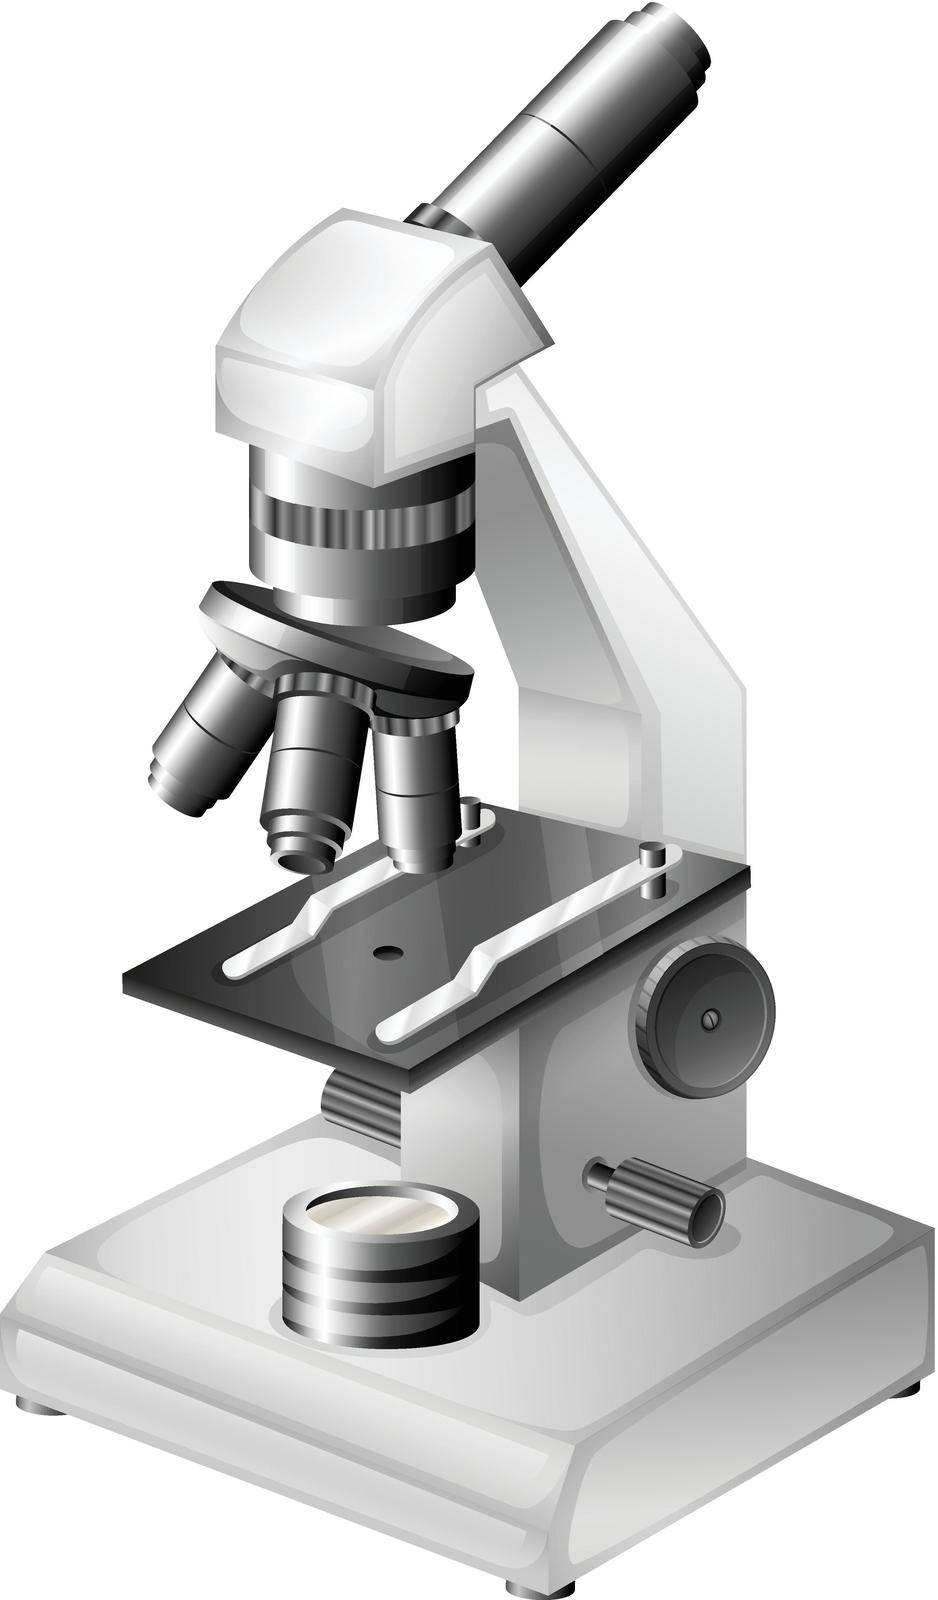 Illustration of a microscopic instrument on a white background